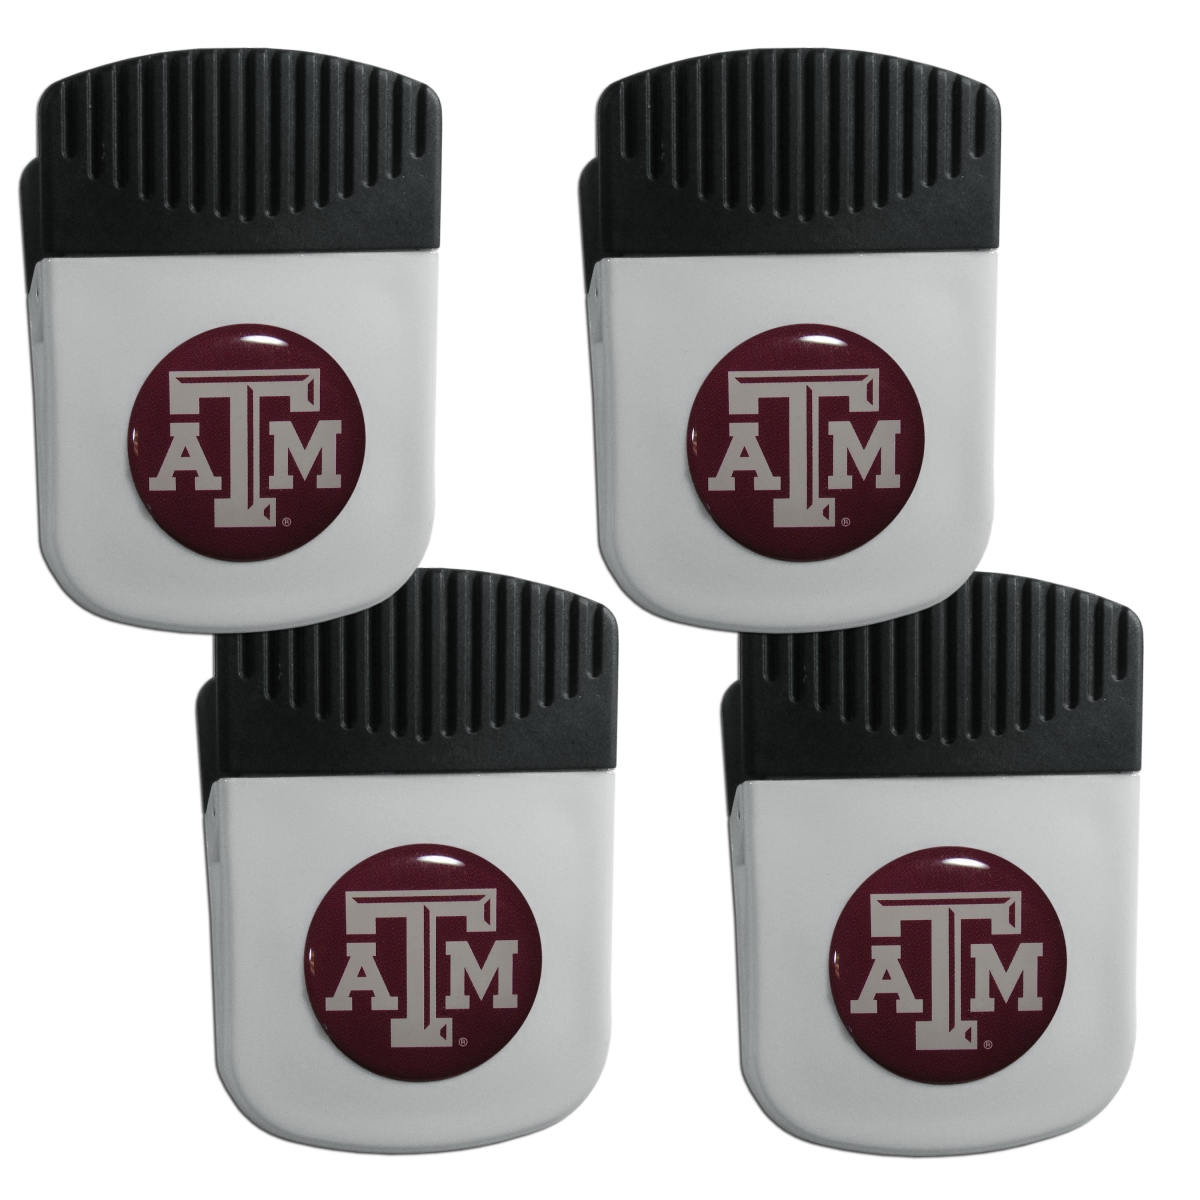 Siskiyou Sports Siskiyou 4CRMC26 Unisex NCAA Texas A & M Aggies Clip Magnet with Bottle Opener - Pack of 4